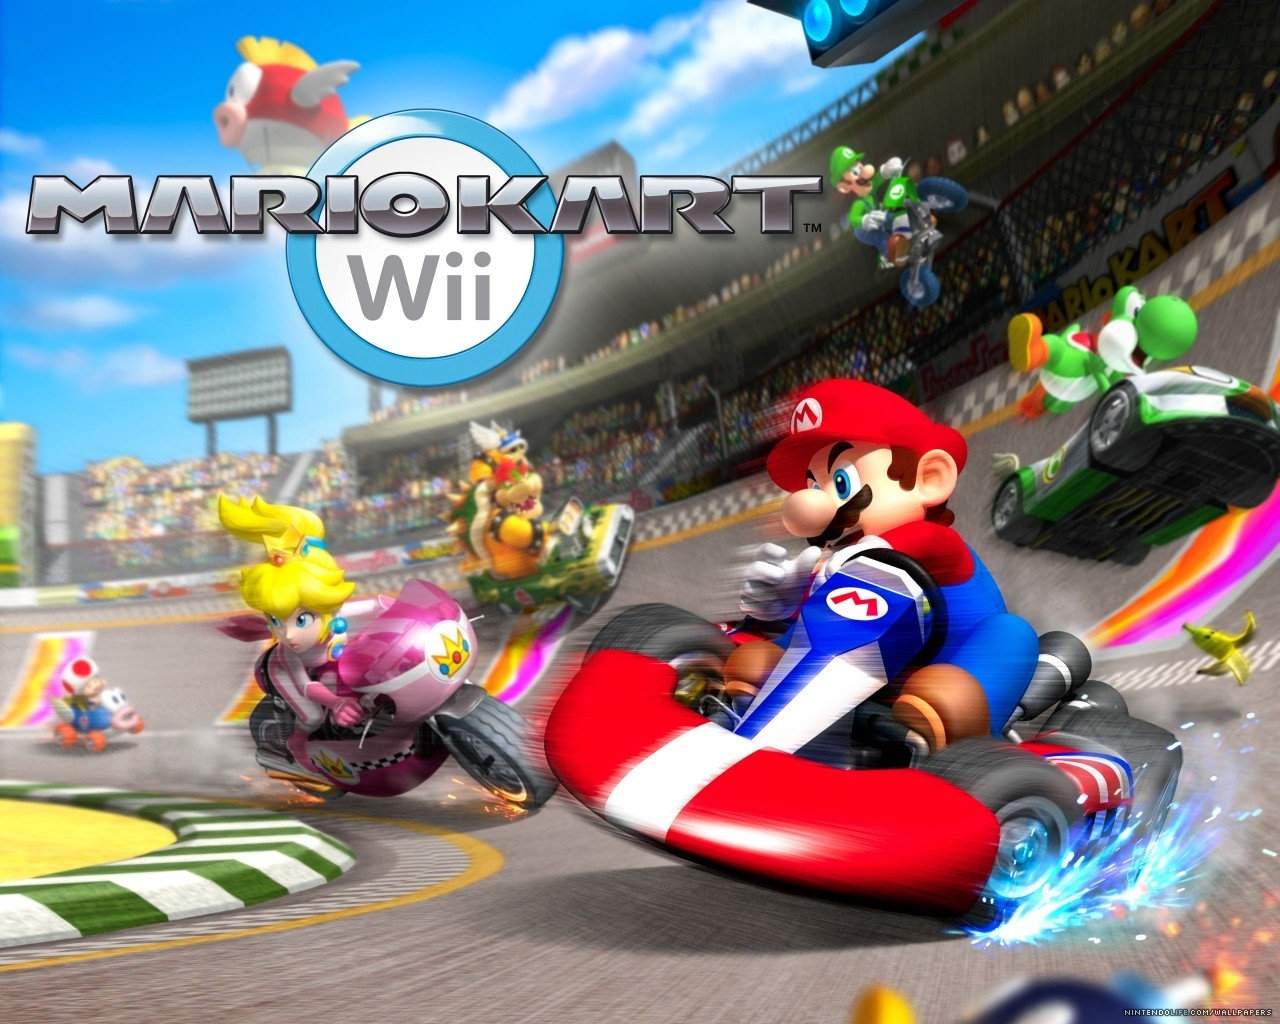 Mario Kart Wii for 1280 x 1024 resolution